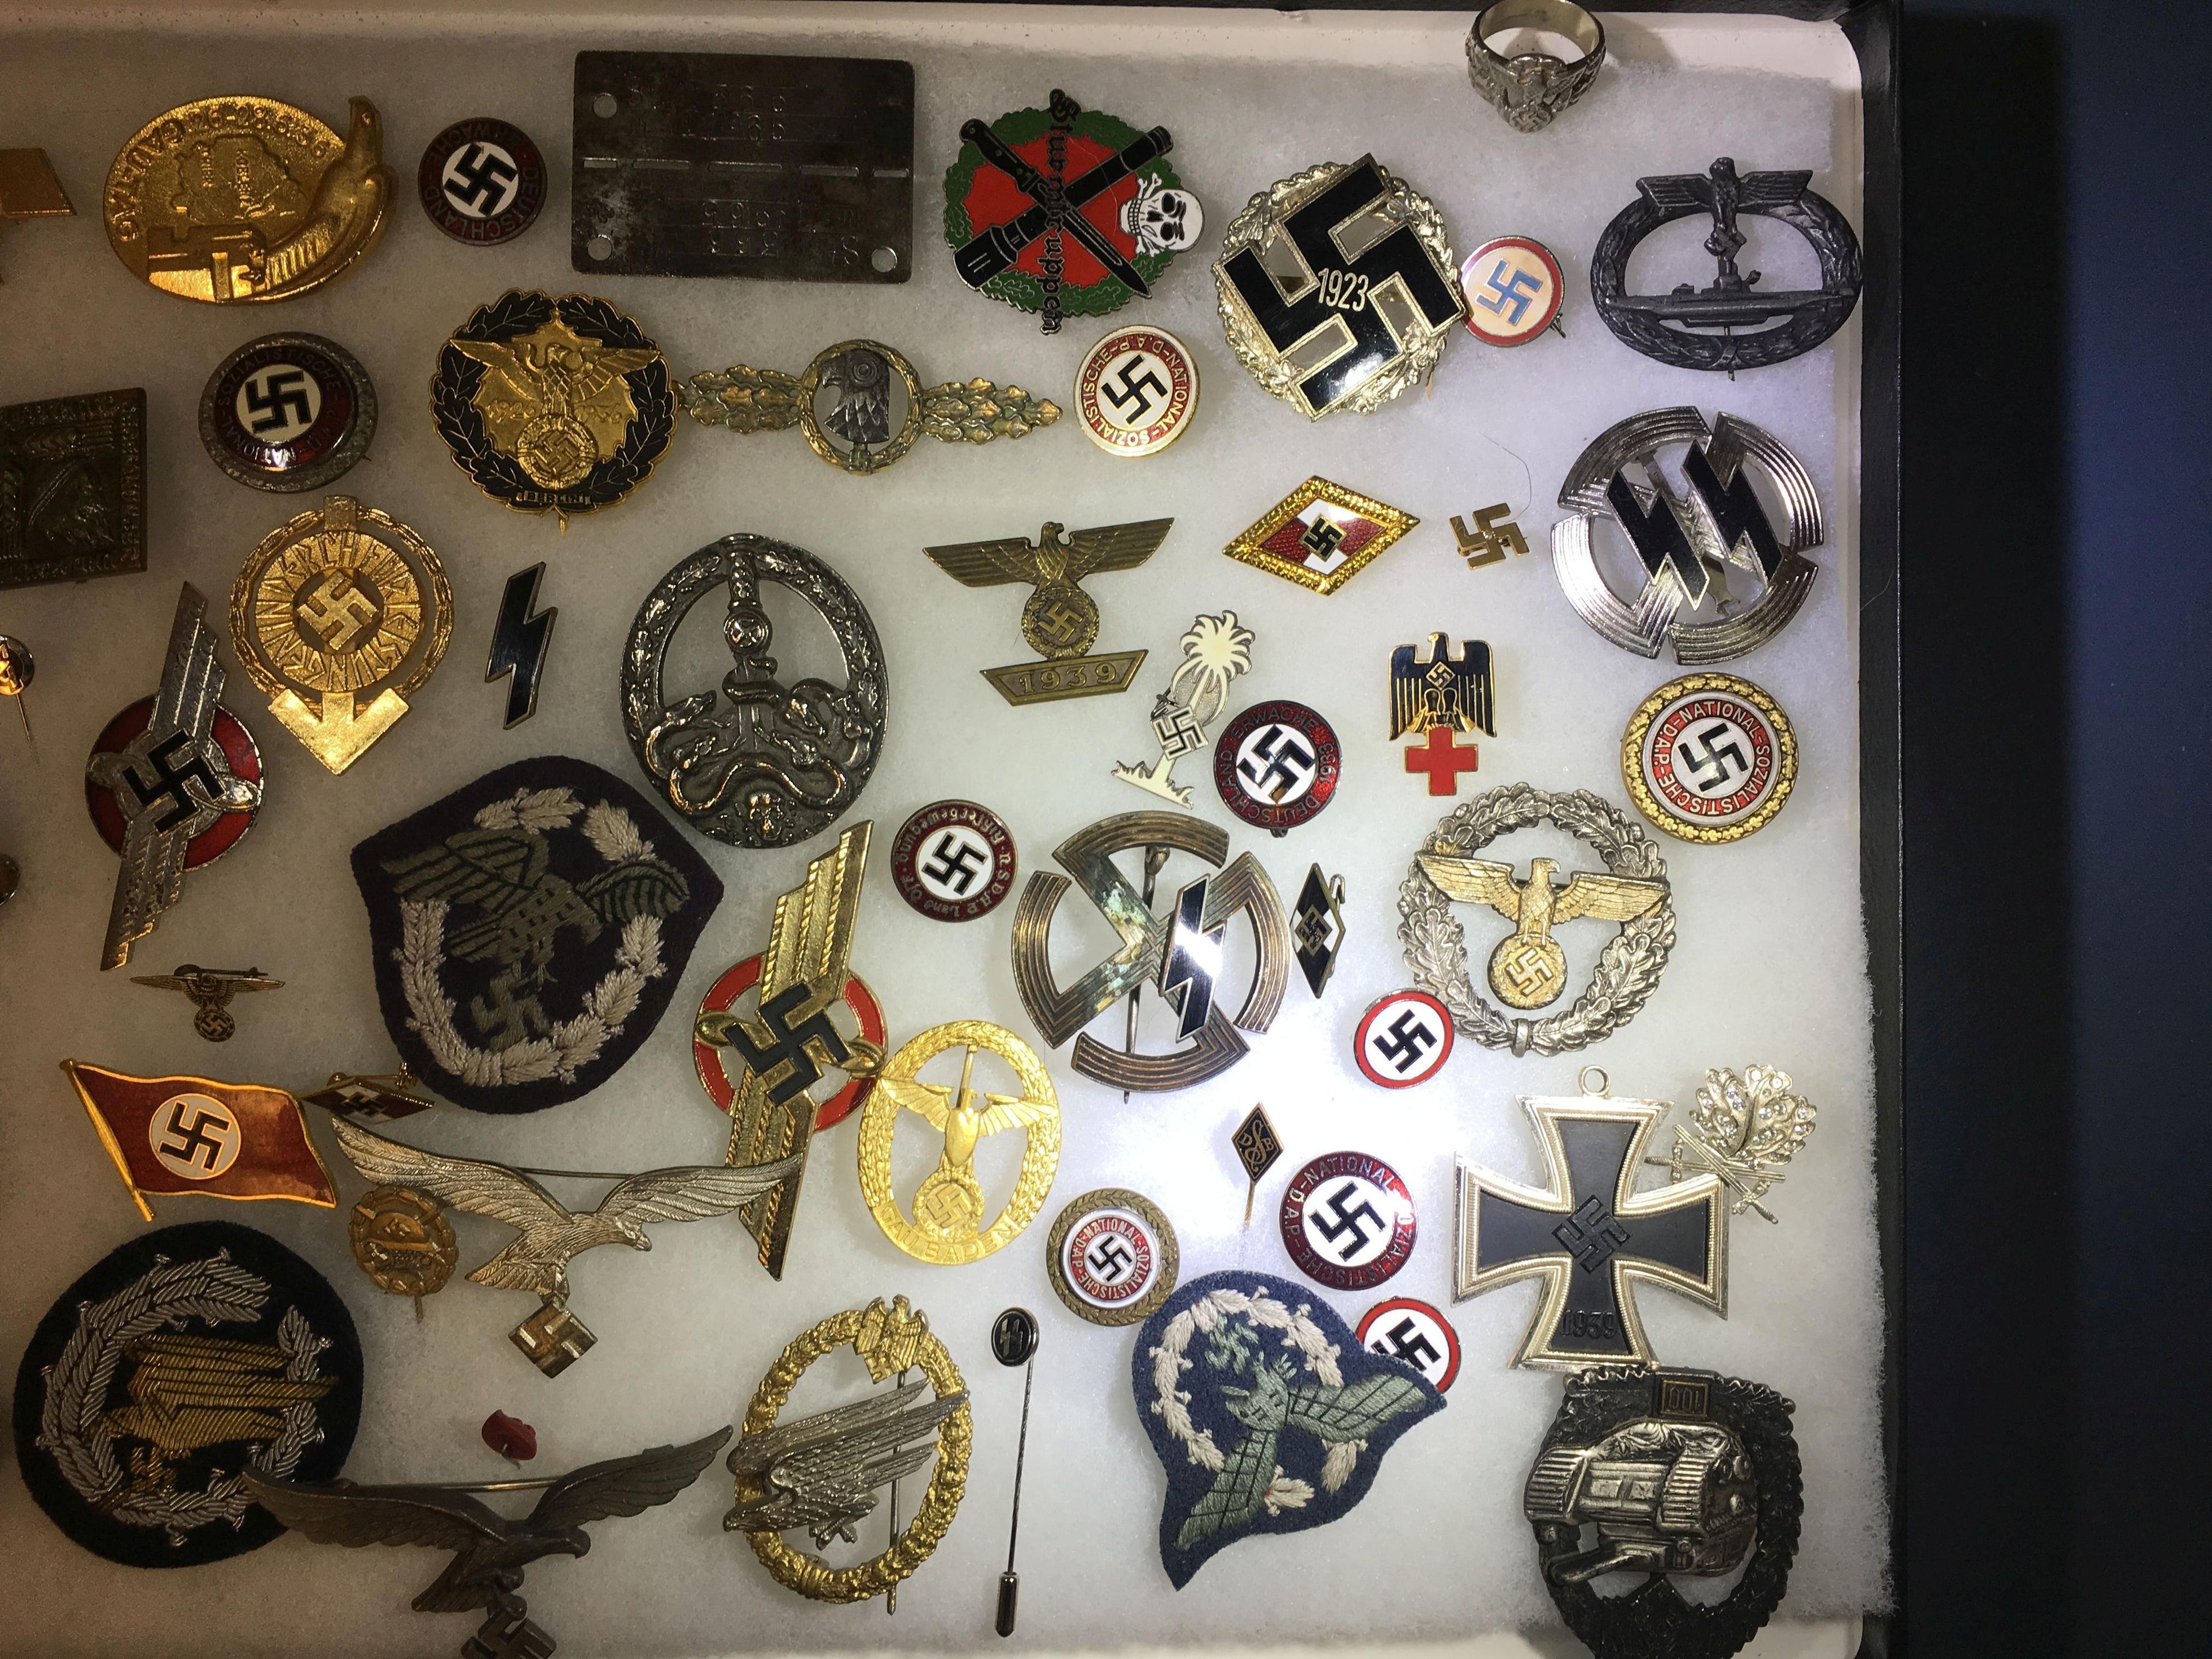 Collection of Nazi pins and badges. All items in lot photos are included.